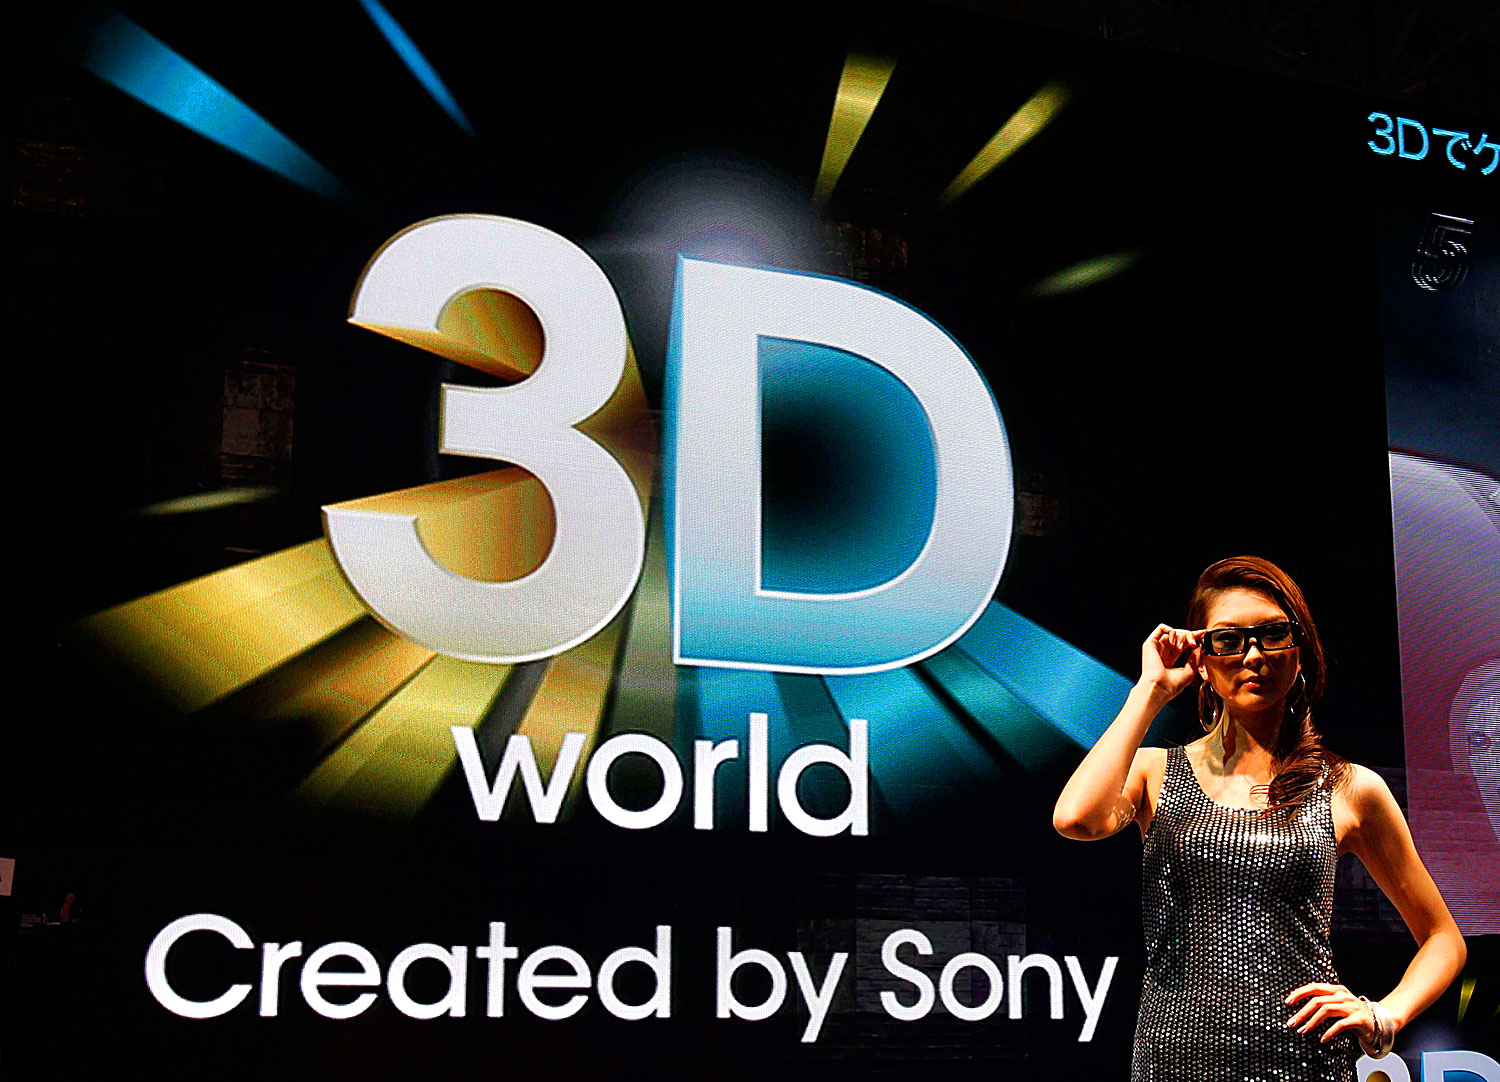 A model poses at Sony's booth to promote its 3D TV sets at CEATEC JAPAN 2010 in Chiba, east of Tokyo, October 5, 2010. The IT & Electronics exhibition showcases the latest electronic products, services and technologies and will also feature meetings 